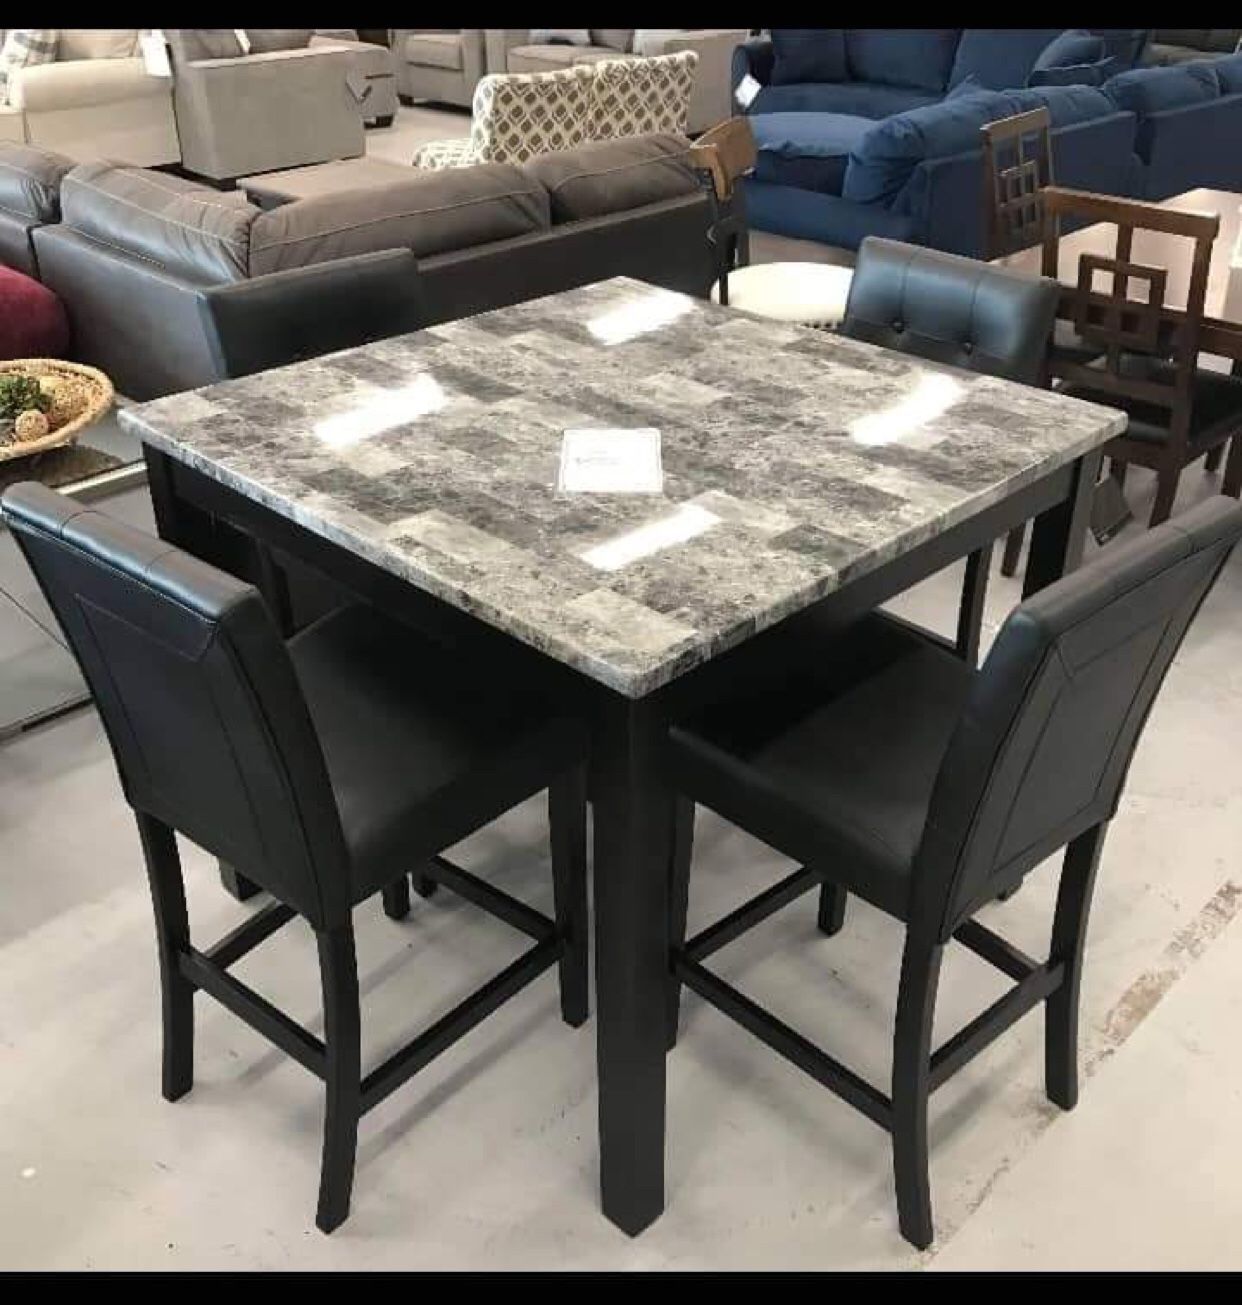 Marble Counter Dining Table And Bar Stools Black🎈 Color Options Available👍 New Brand ✅